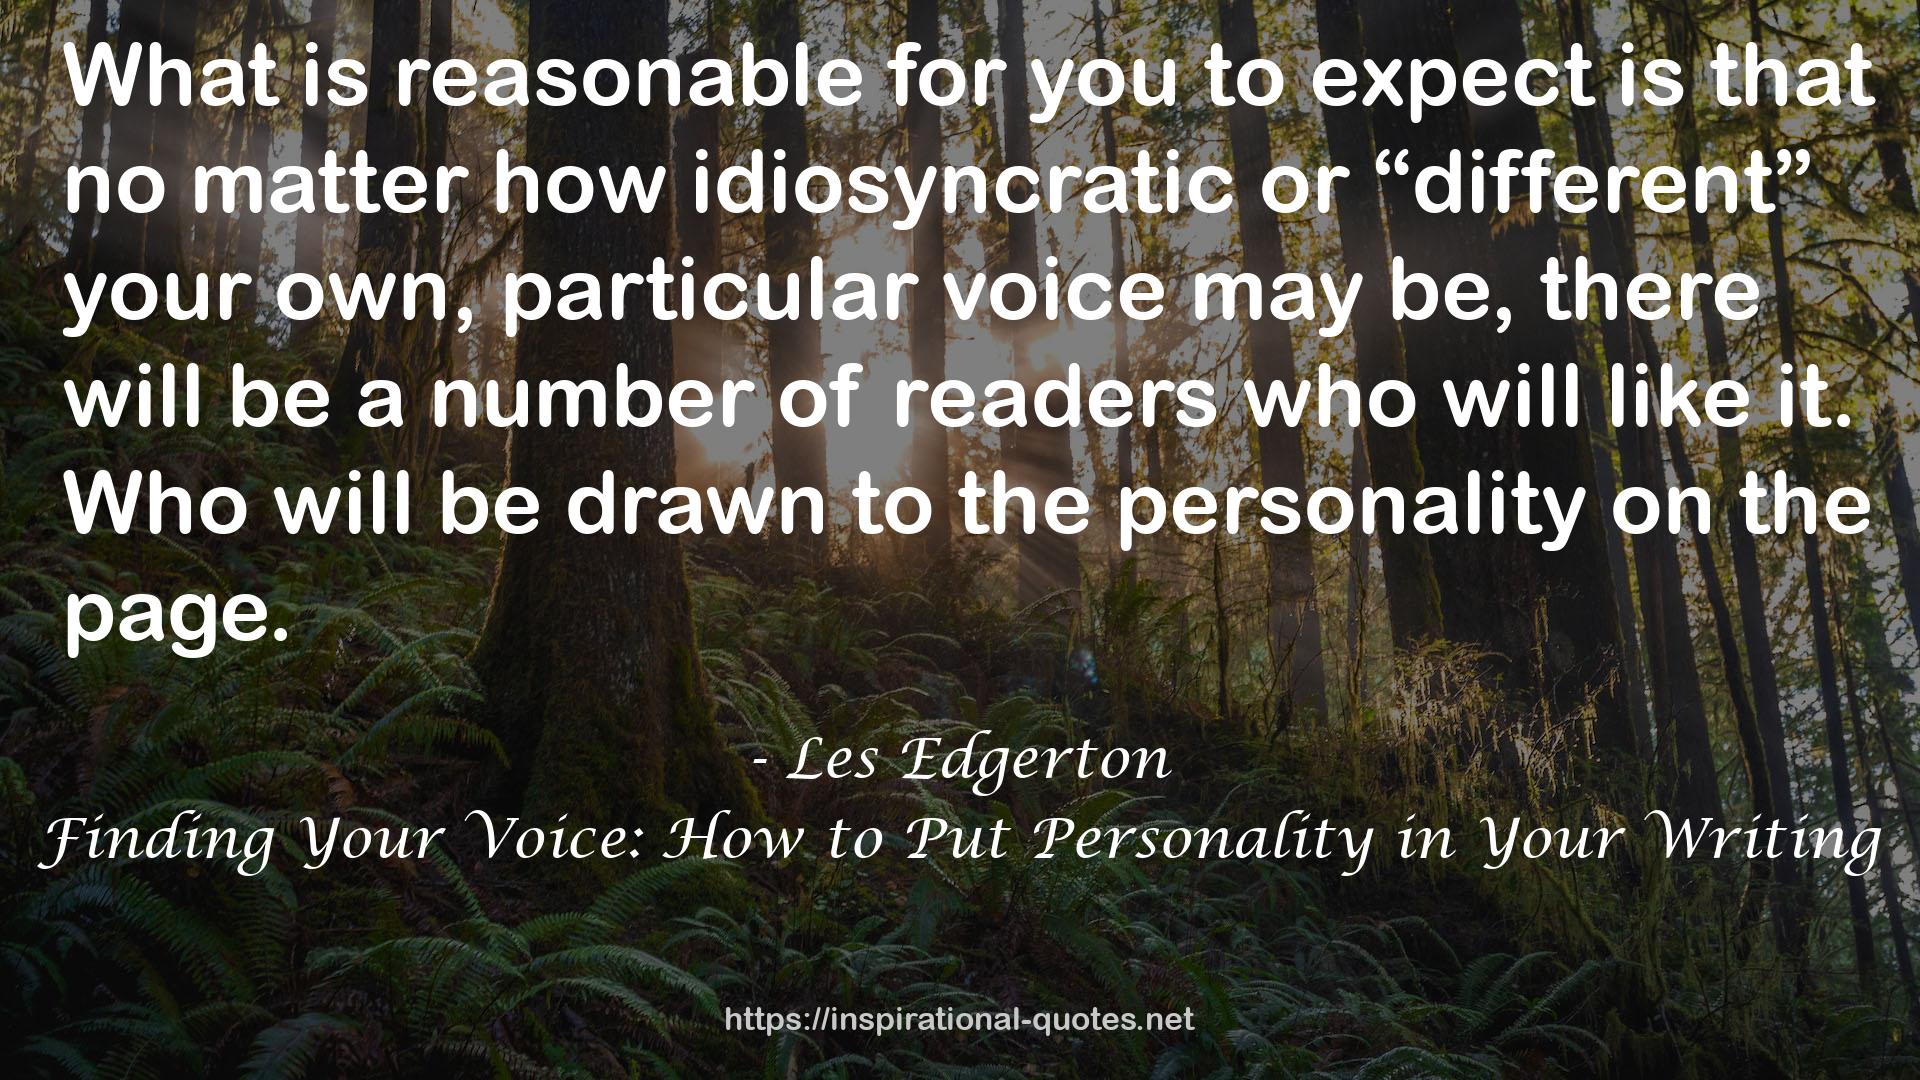 Finding Your Voice: How to Put Personality in Your Writing QUOTES